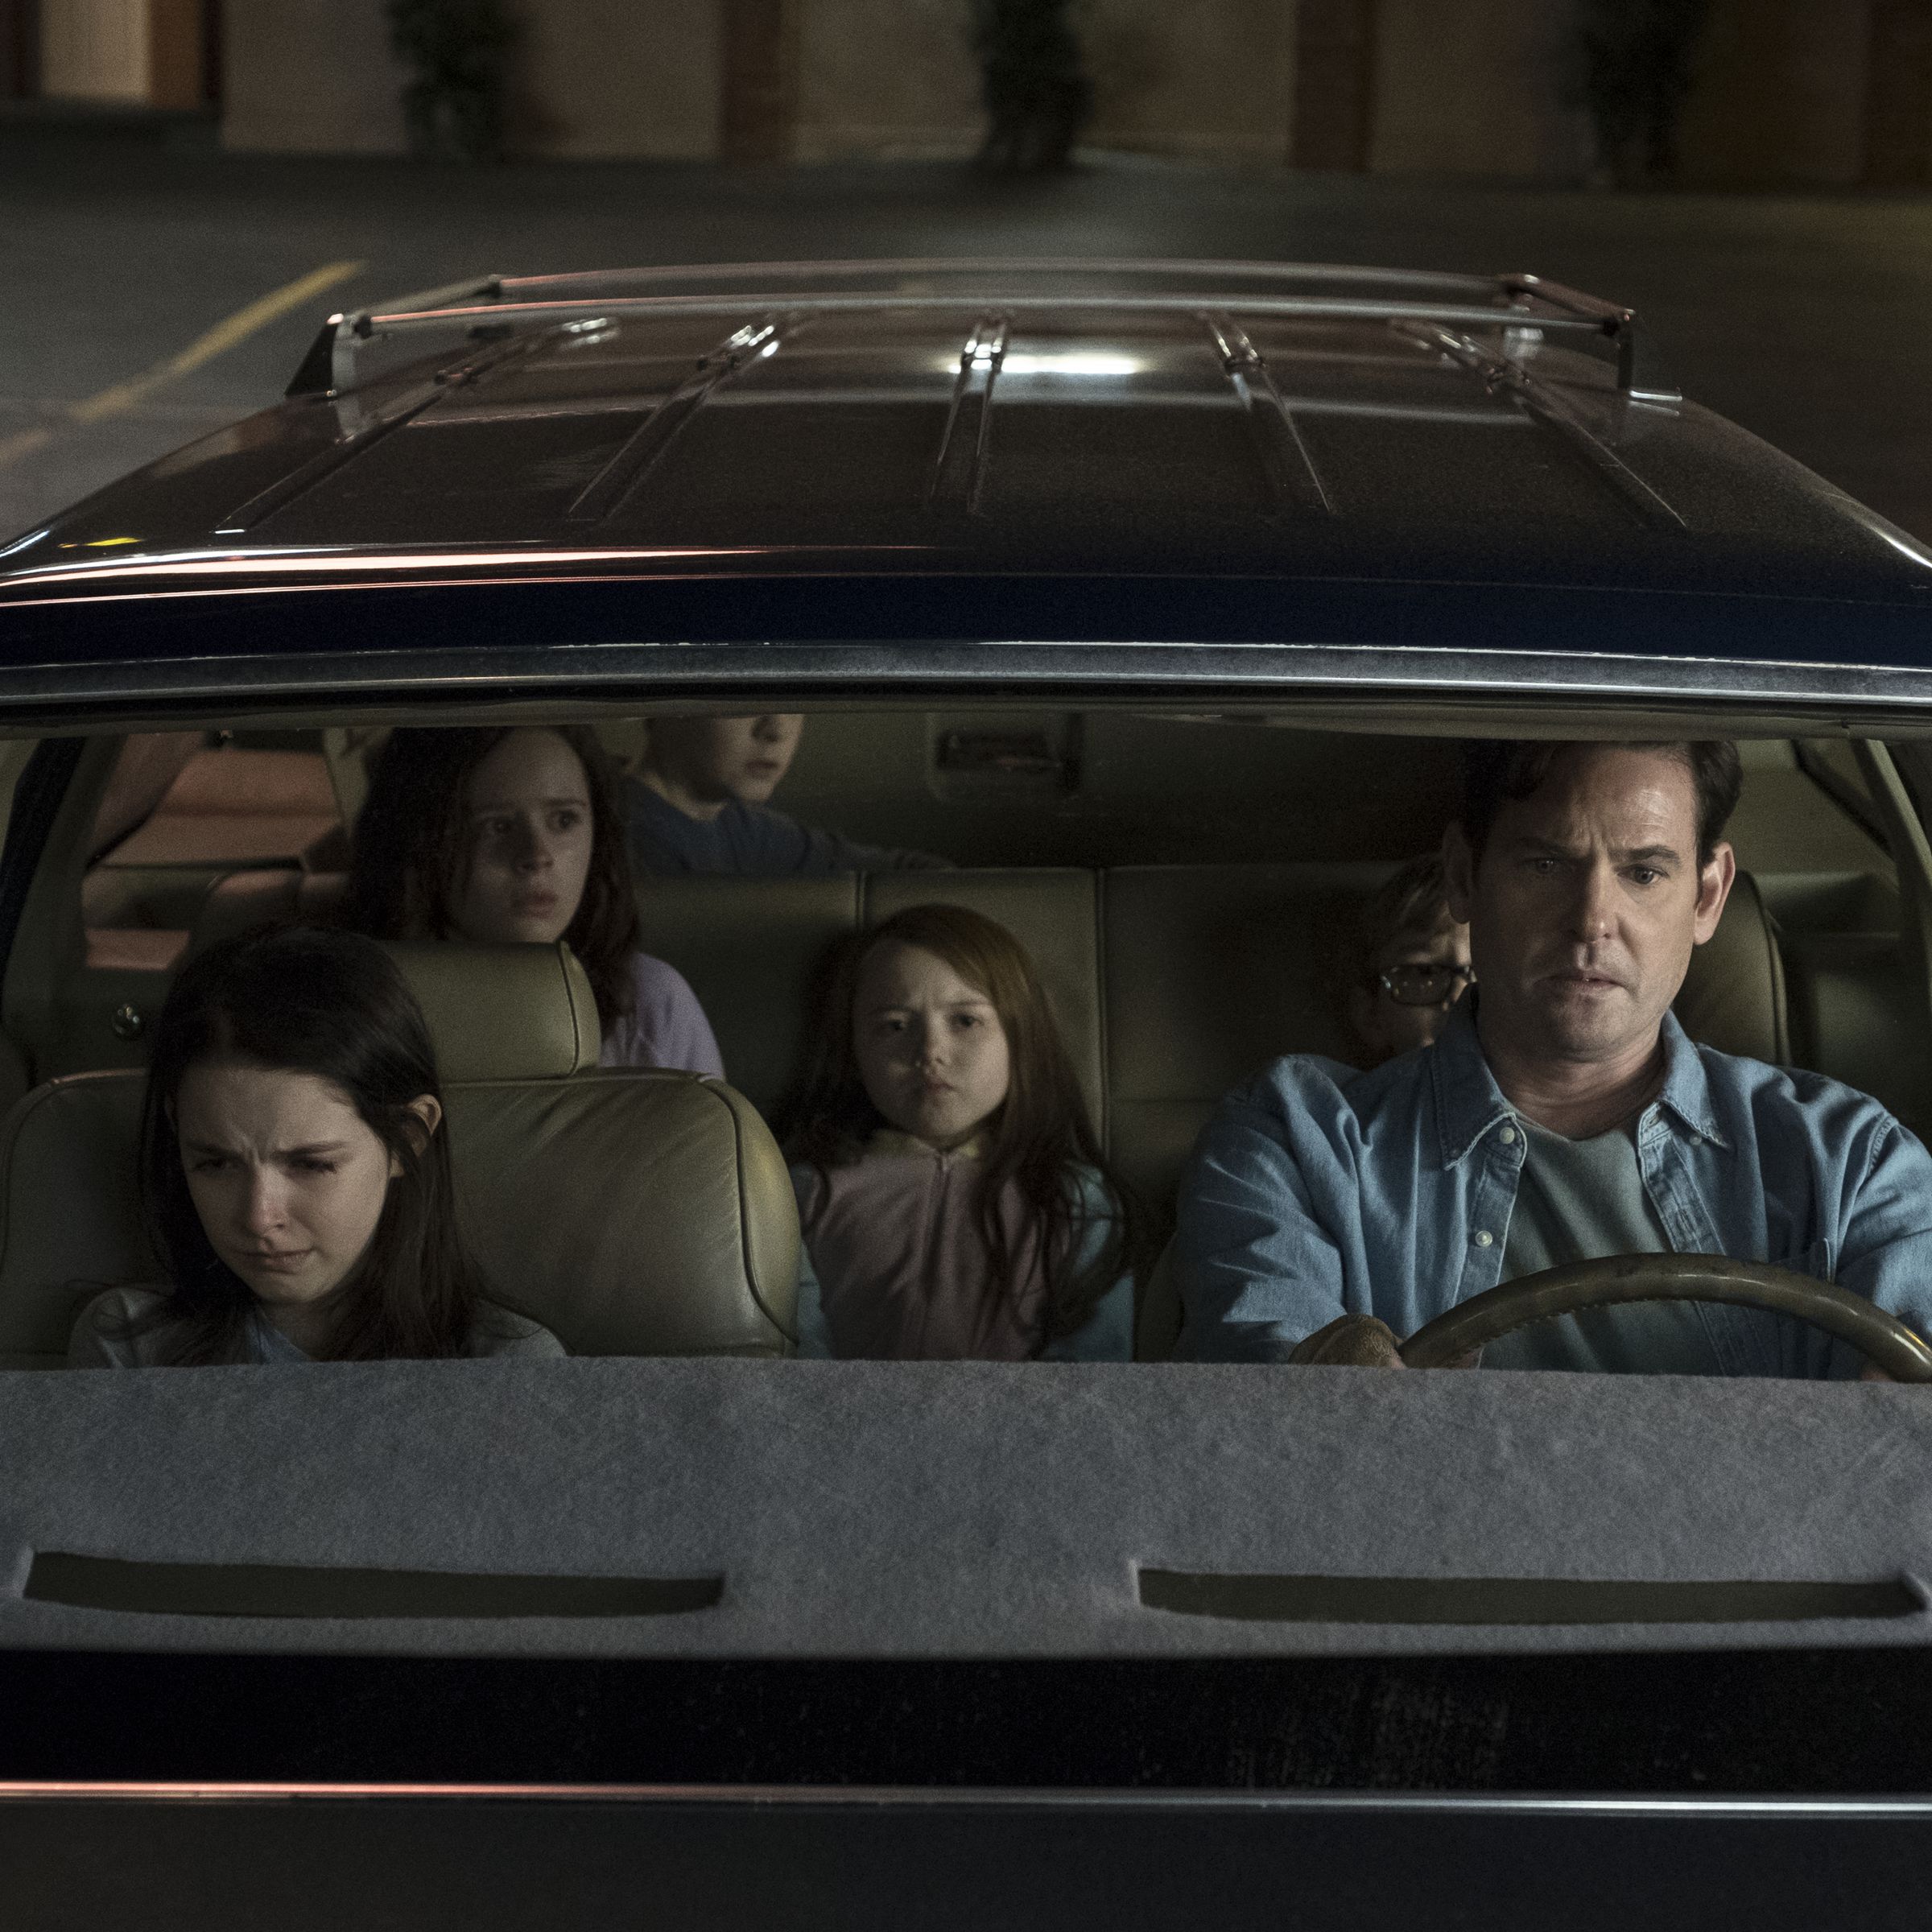 A still photo from The Haunting of Hill House.